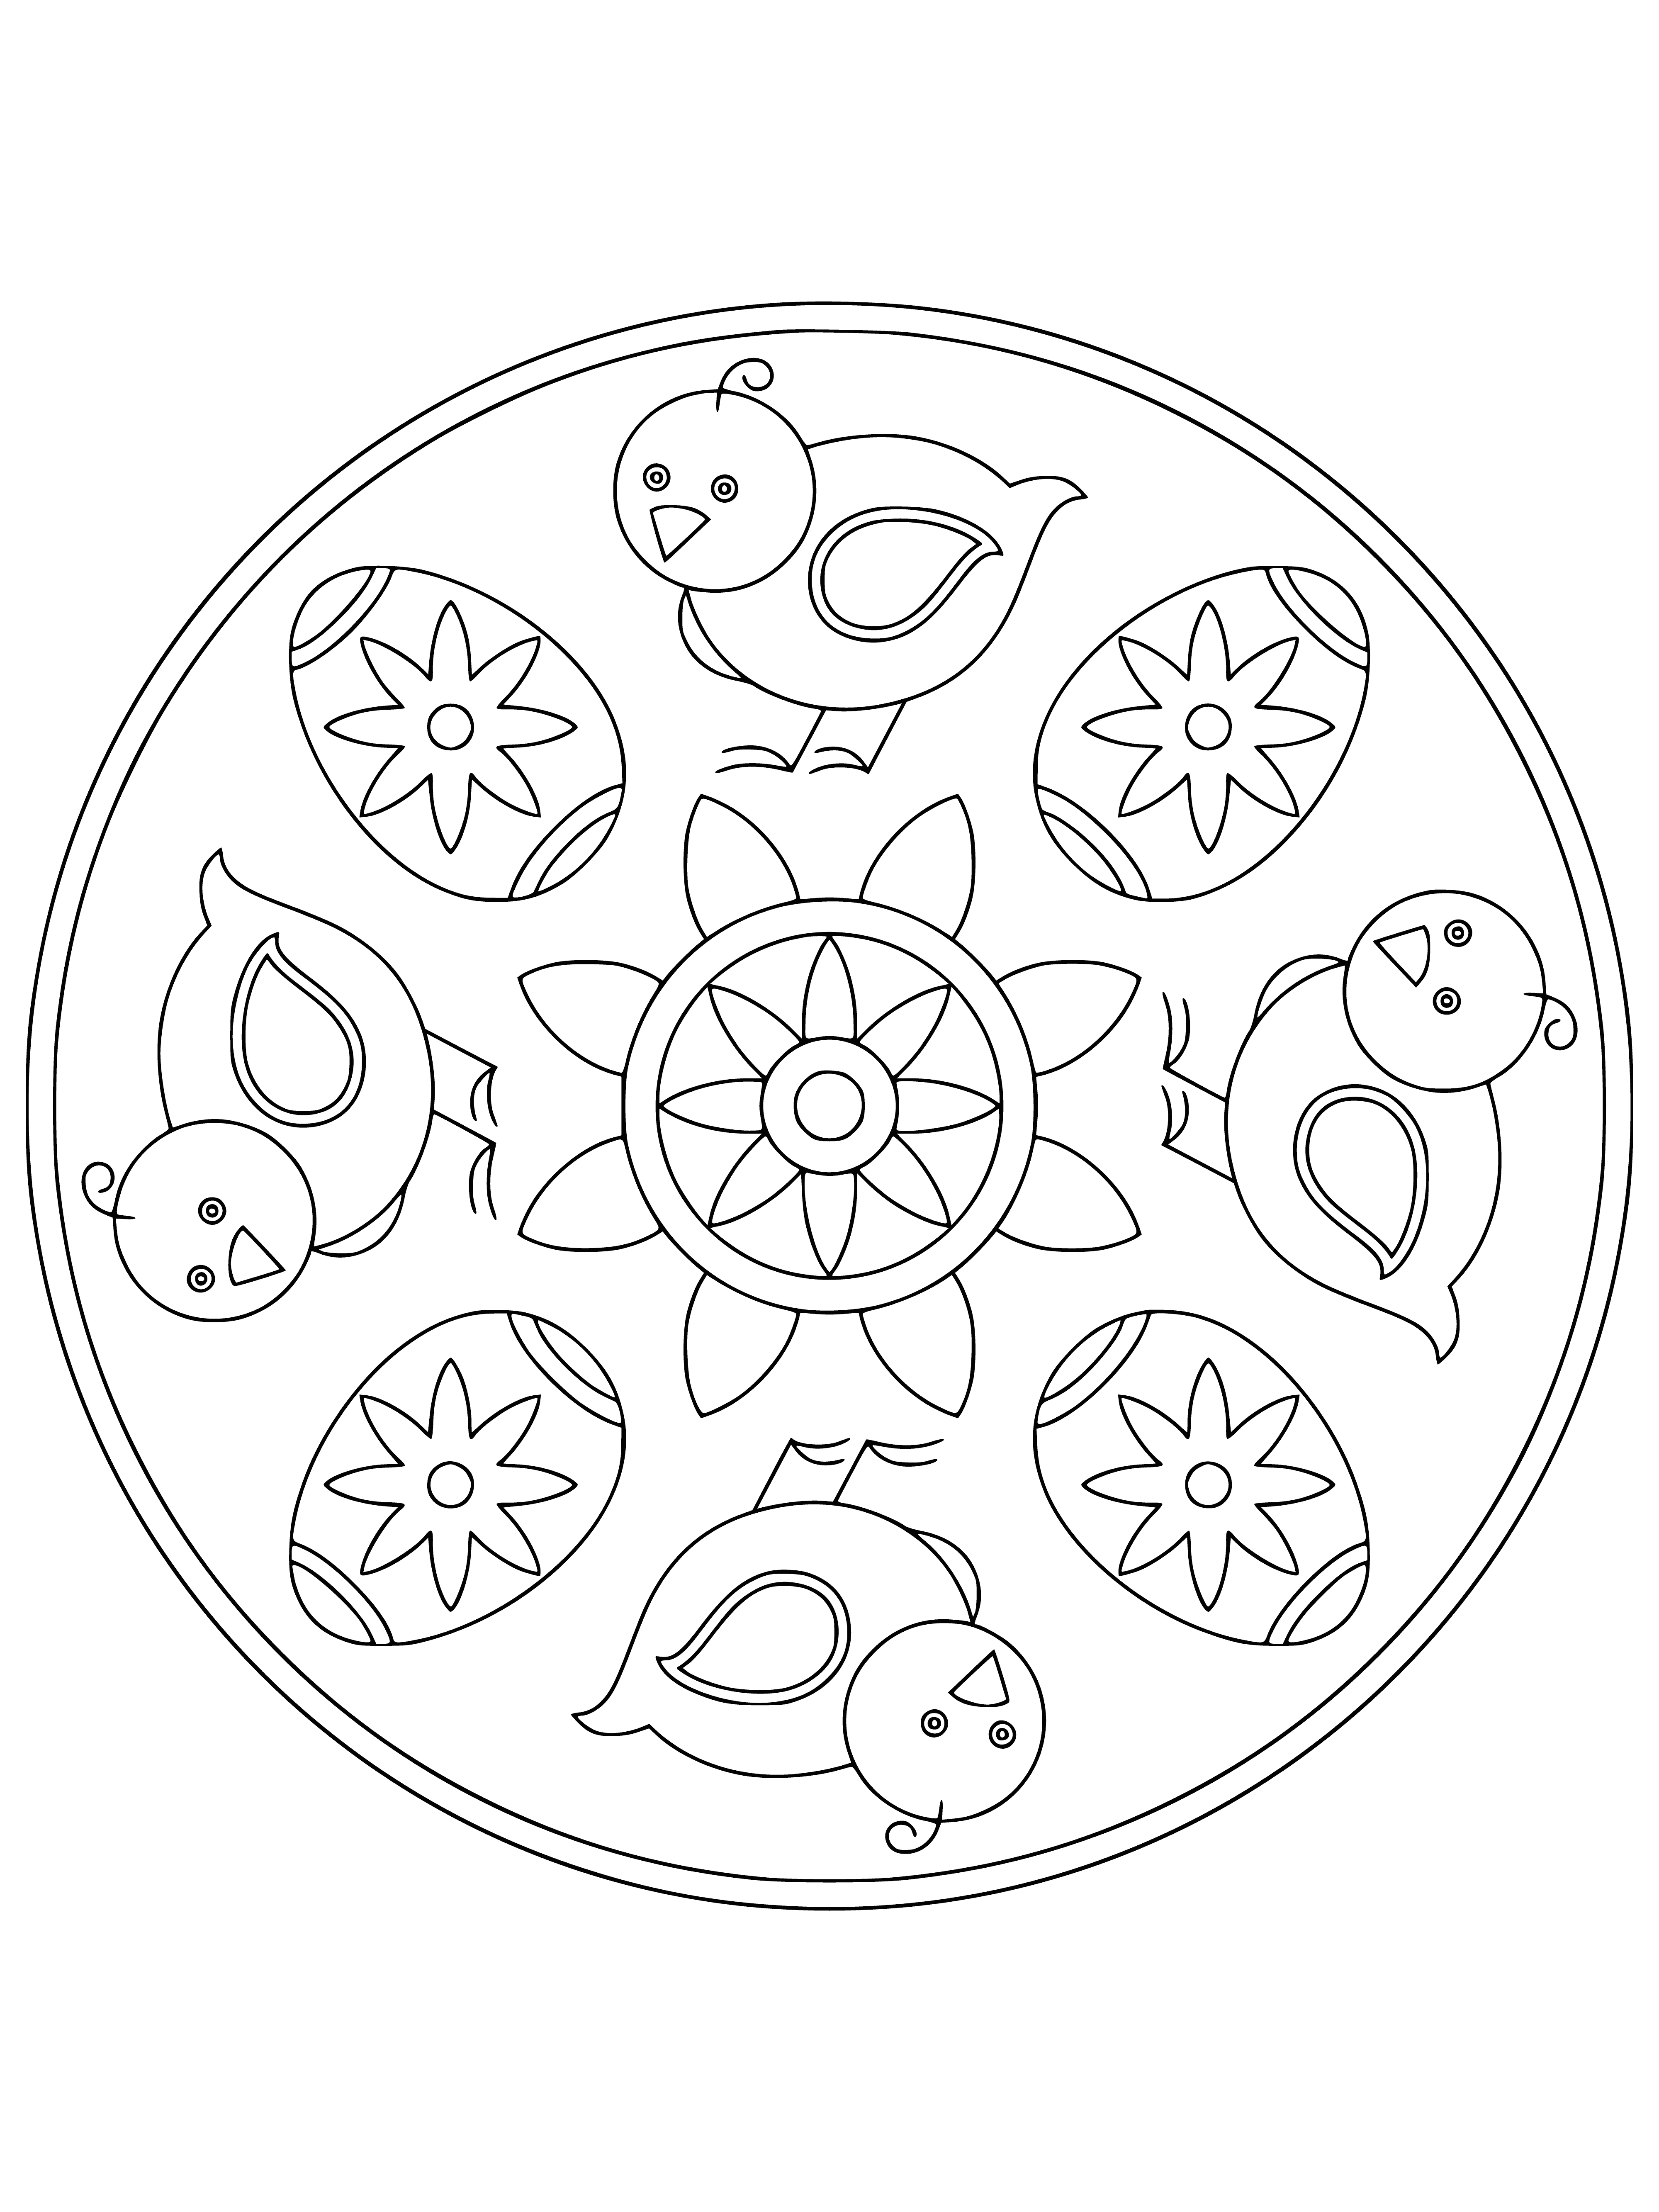 coloring page: Beautiful Easter mandala design featuring Easter eggs, bunnies, and flowers - perfect for a peaceful coloring experience.